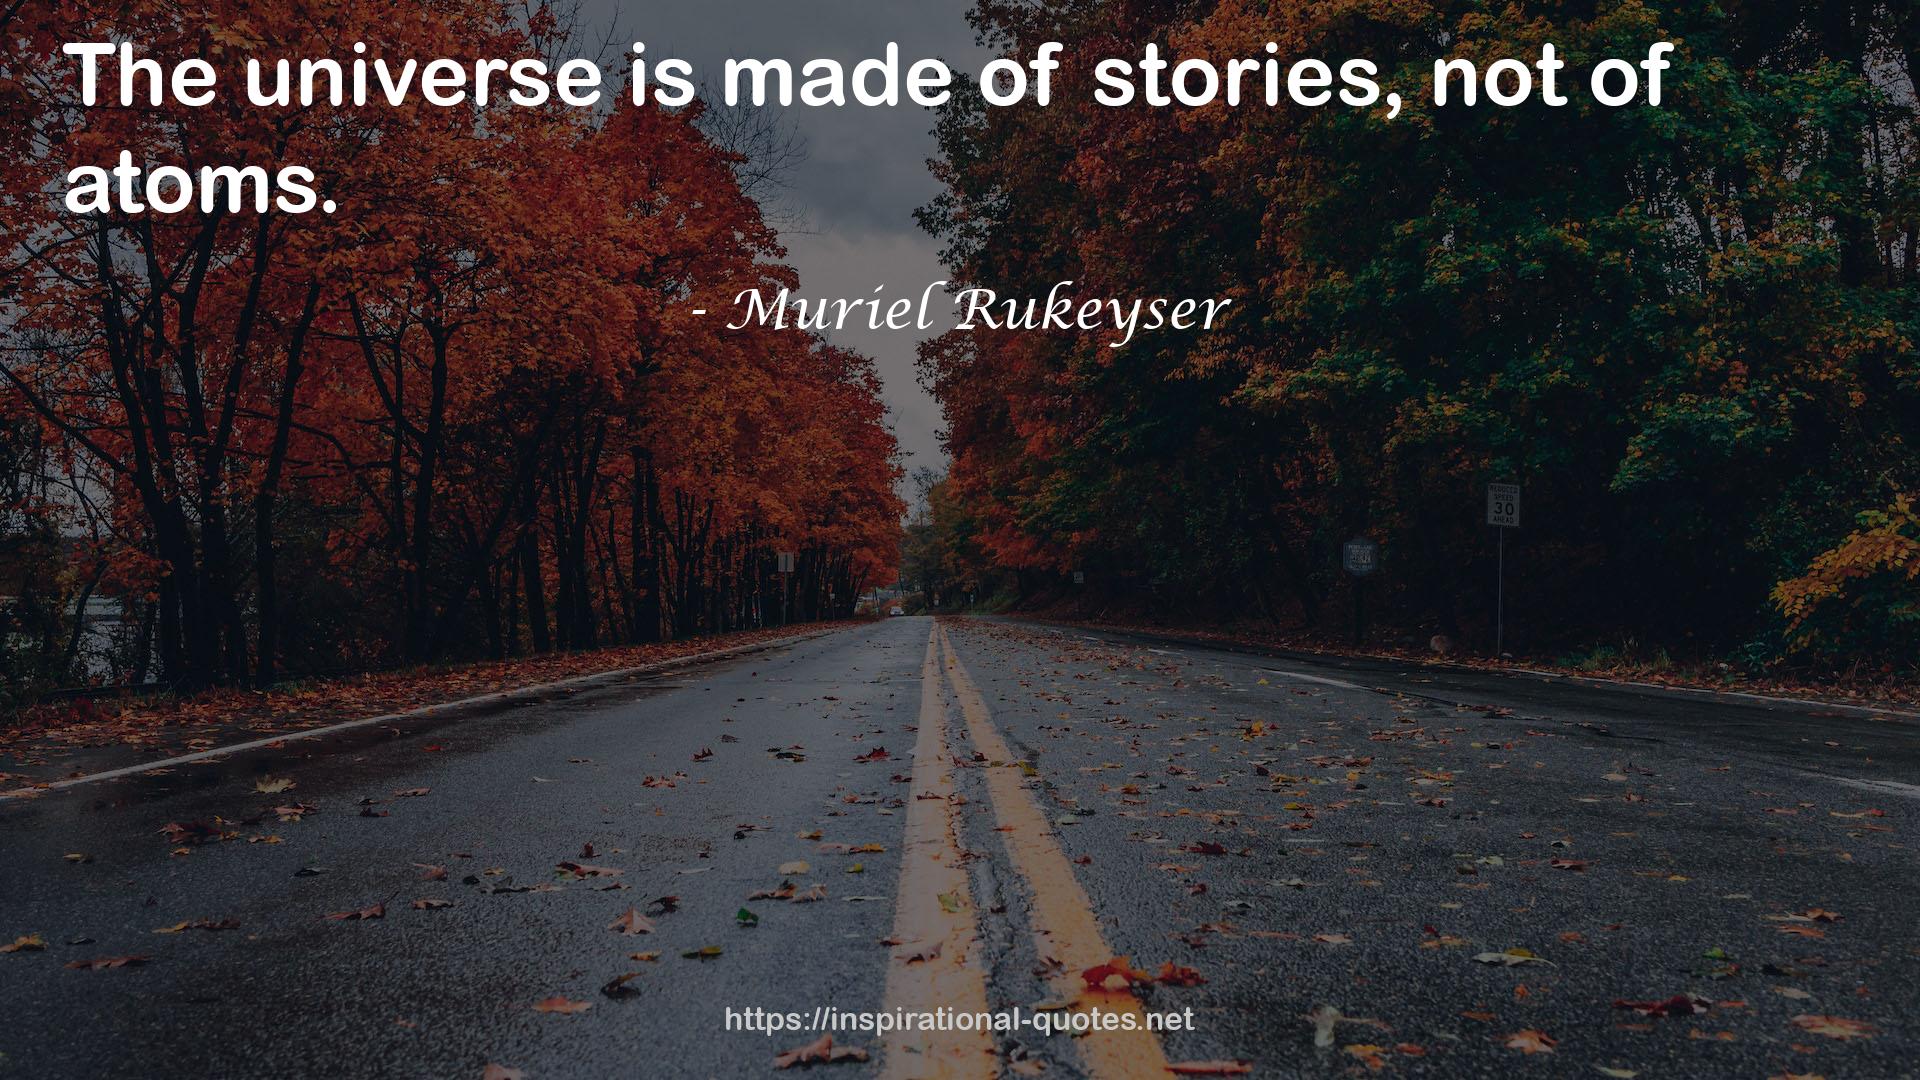 Muriel Rukeyser QUOTES